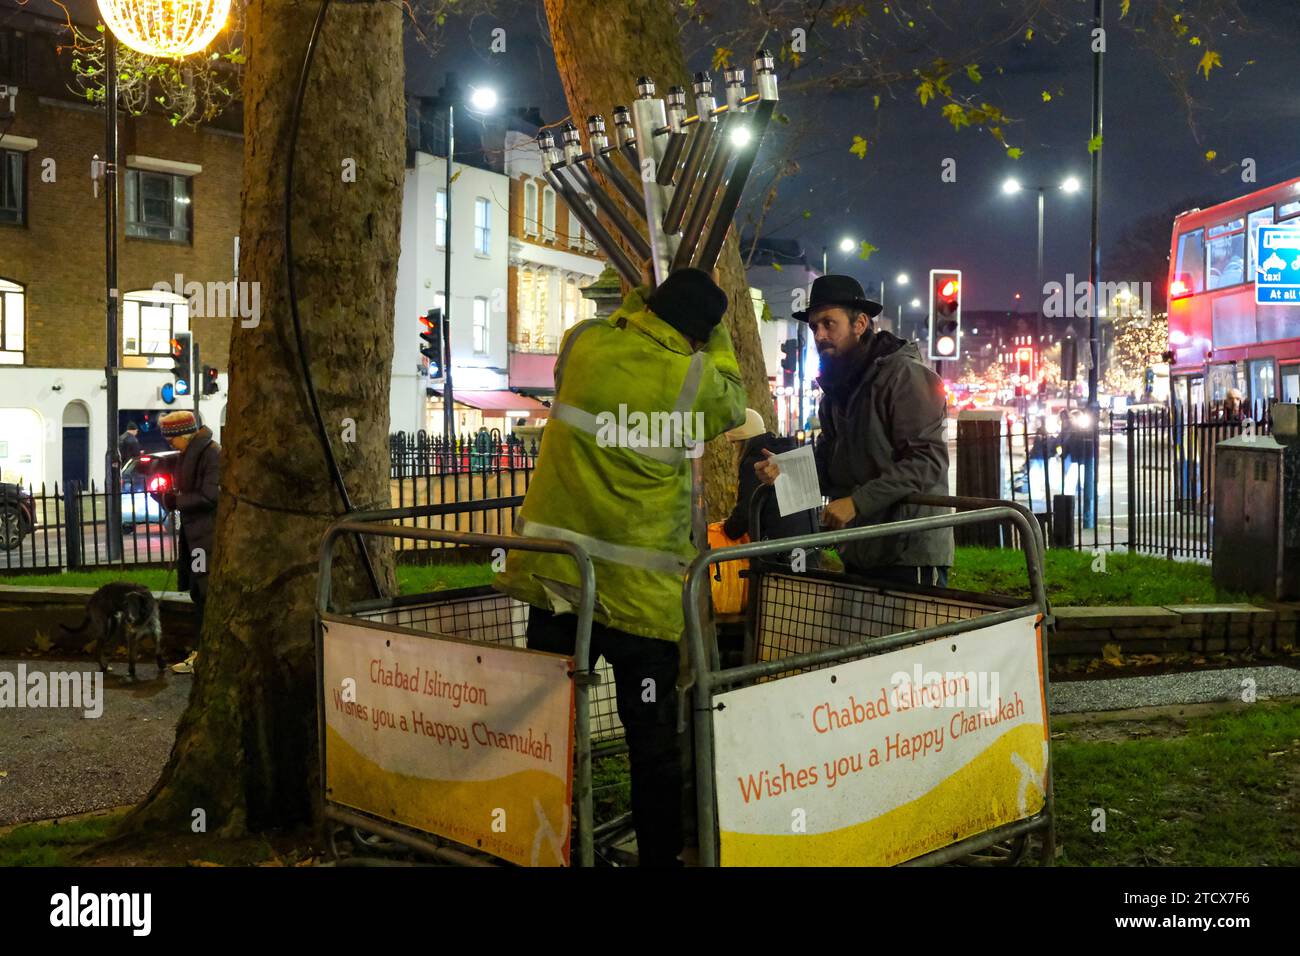 London, UK. 14th December, 2023. A memorah is reinstalled in Islington Green. A solidarity event attended by MPs, community leaders and members of the public was held after the menorah was vandalised earlier today. Rabbi Mendy Korer led the proceedings, relighting the candles  - and the eighth and final one for the Hanukkah festival. The Metropolitan Police investigating, believe that the menorah was intentionally damaged, as antisemitic incidents increase since the Israel-Hamas war was declared. Credit: Eleventh Hour Photography/Alamy Live News Stock Photo